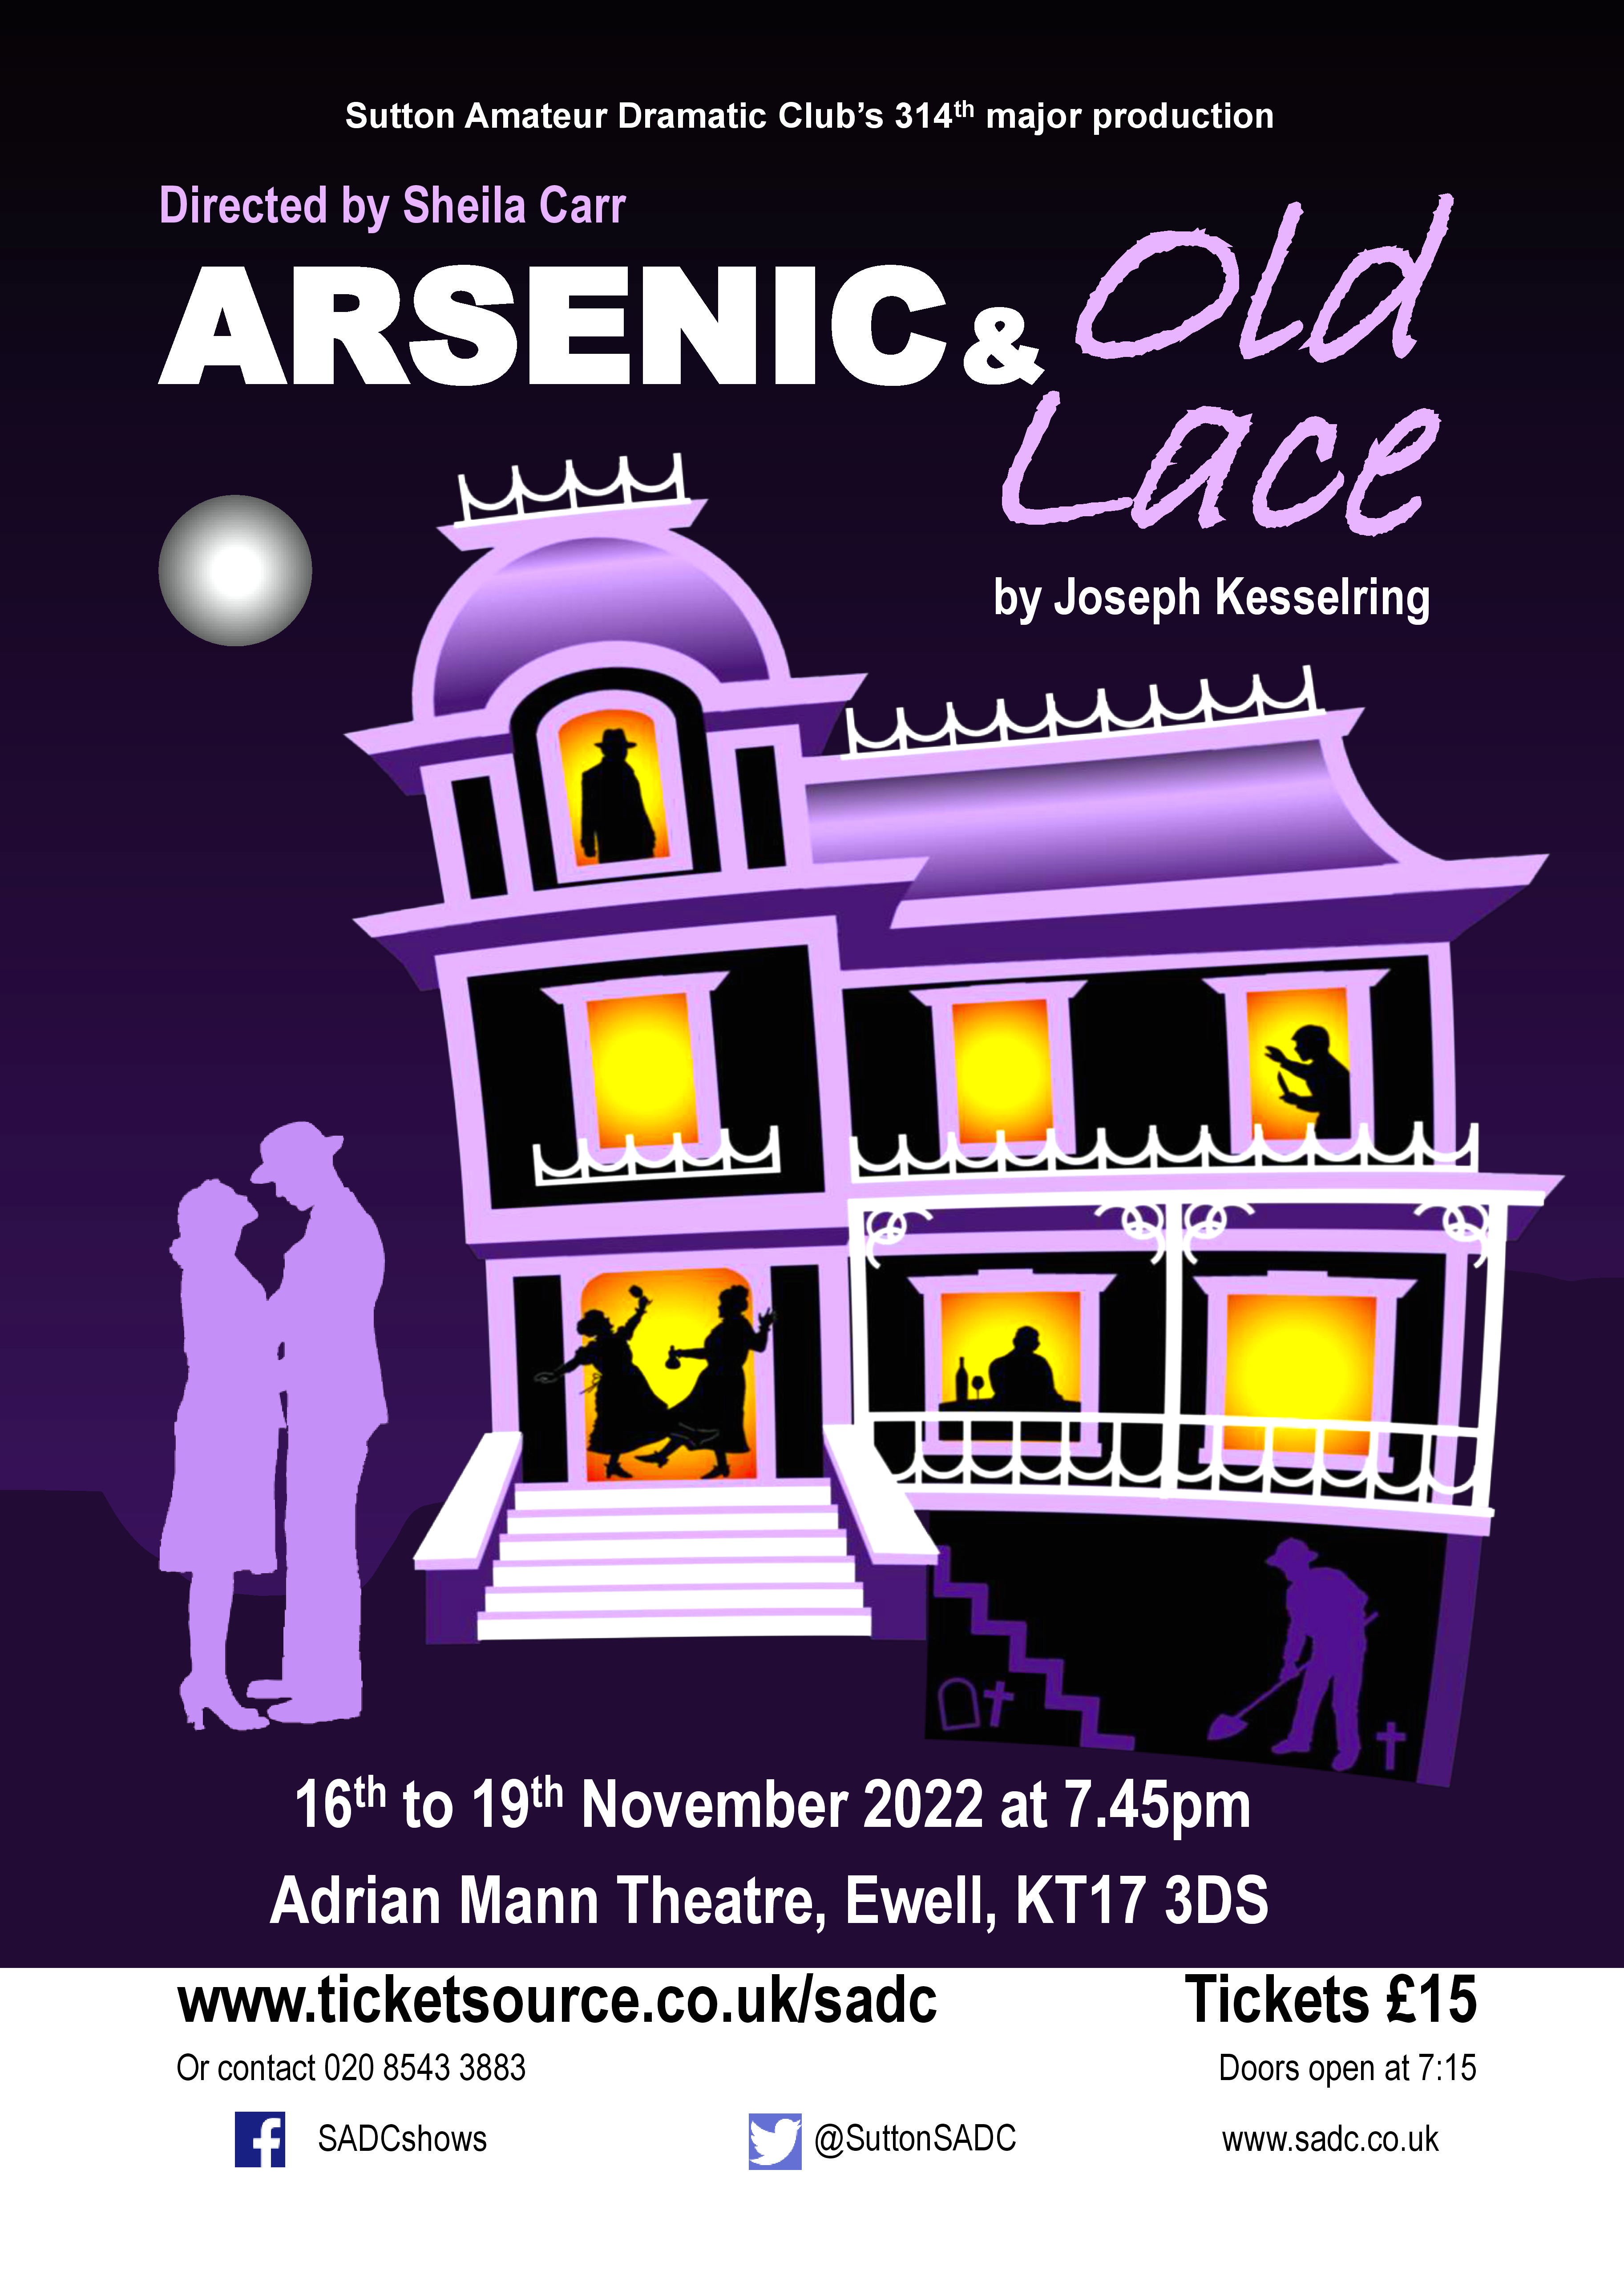 Sutton Amateur Dramatic Club presents the play Arsenic and Old Lace